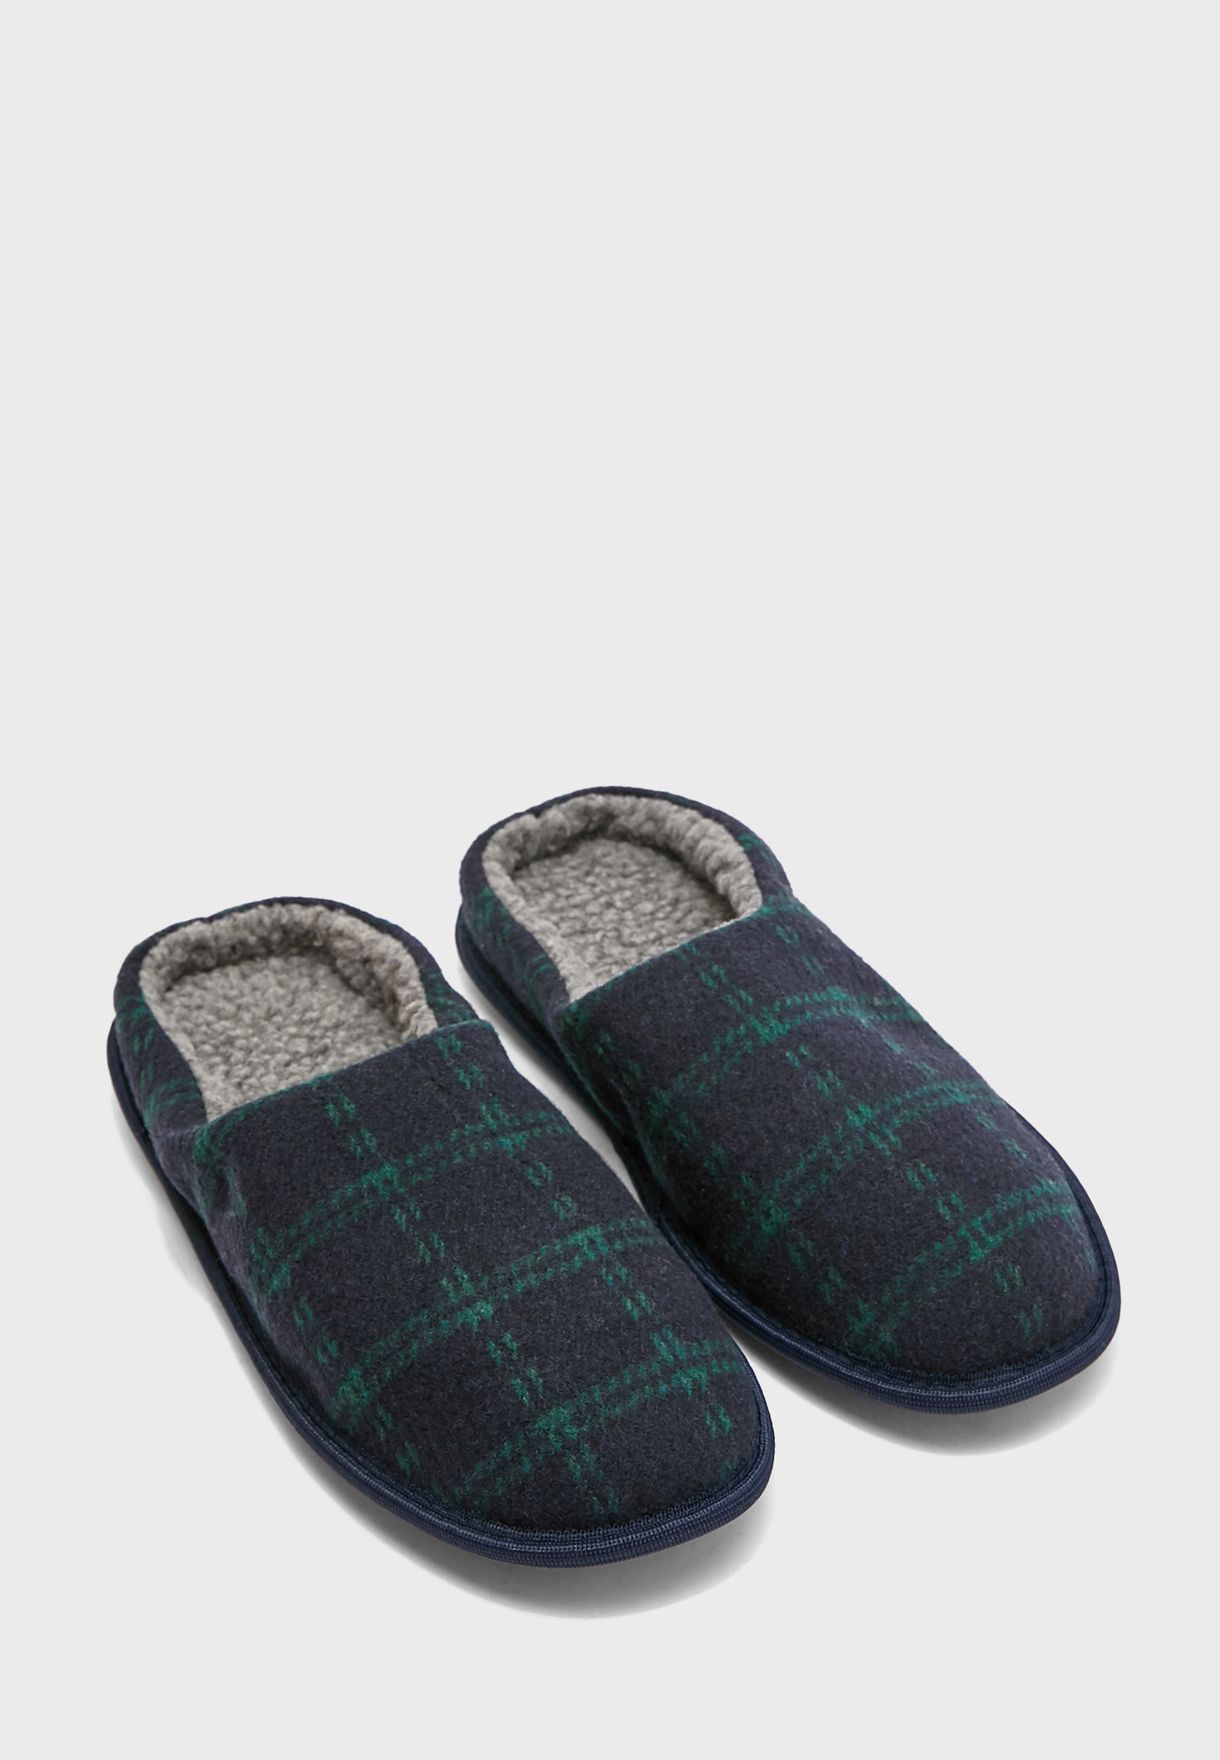 mens checked slippers